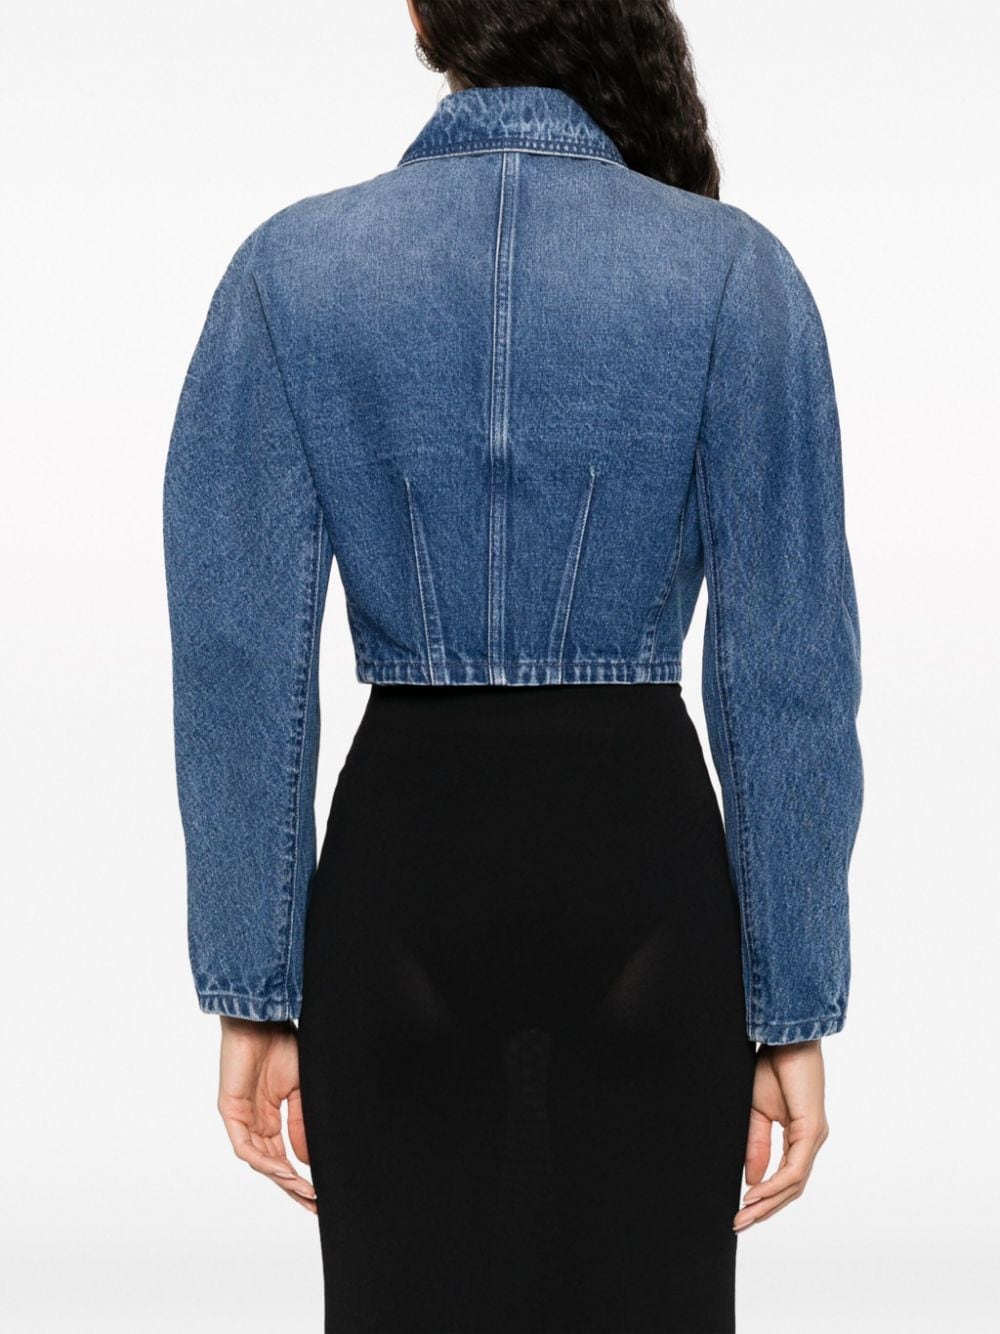 VERSACE Stylish Cropped Denim Jacket for Women in Navy Blue - FW23